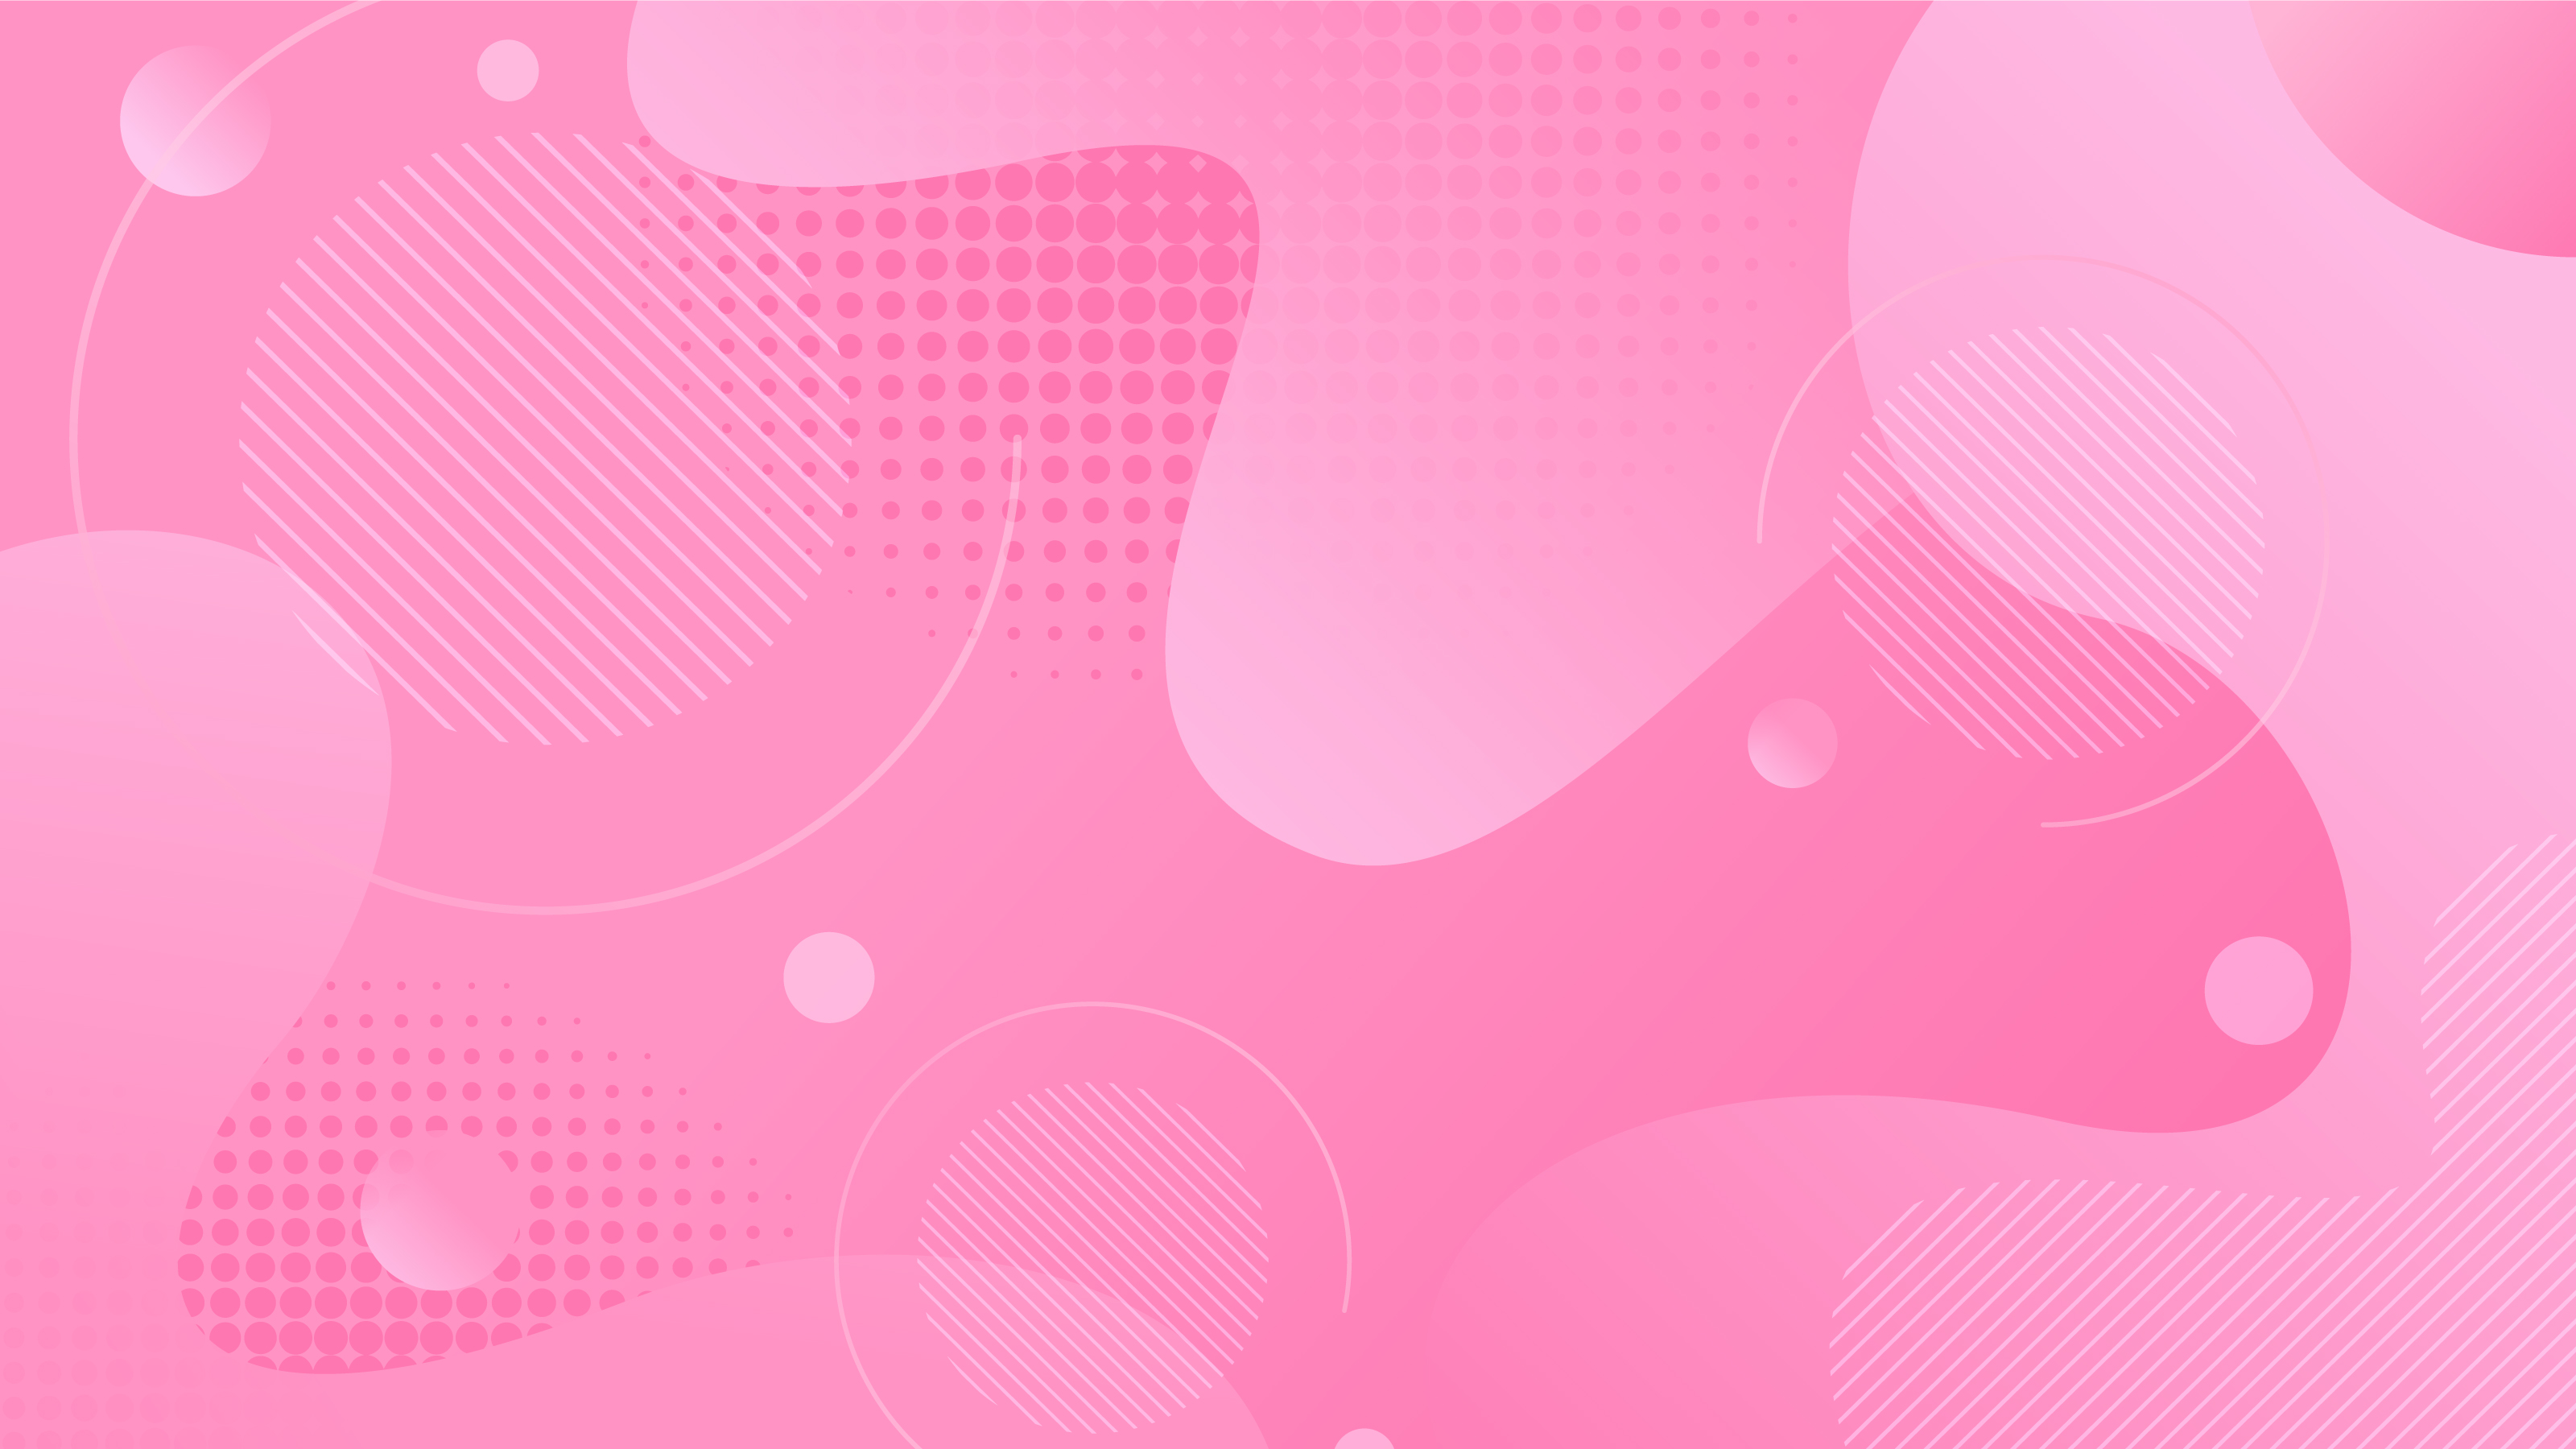 b-s-u-t-p-999-background-pink-abstract-cao-c-p-v-tuy-t-p